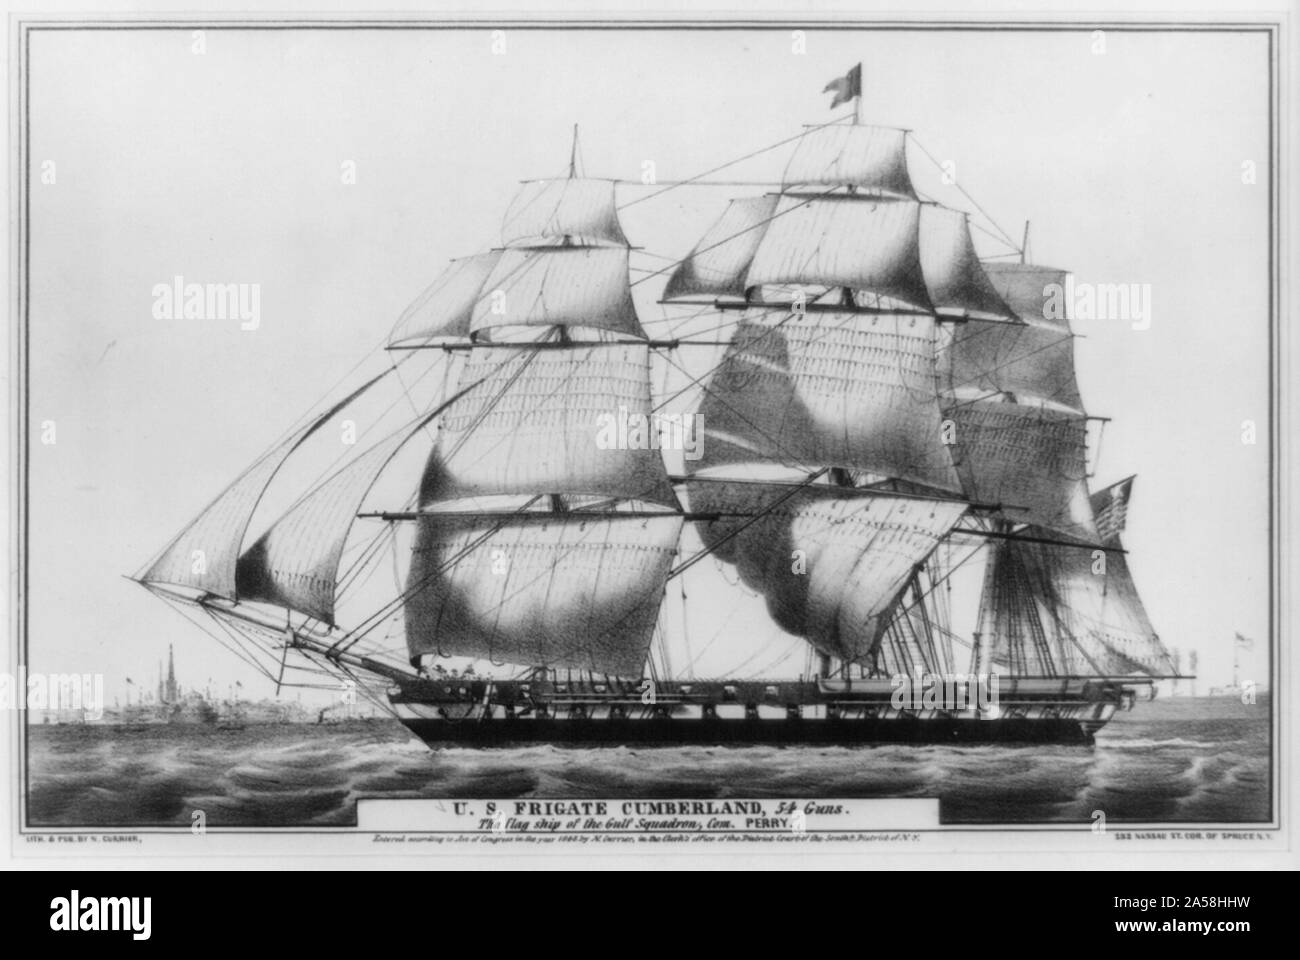 U.S. frigate Cumberland, 54 guns - the flag ship of the Gulf Squadron, Com. Perry Abstract: Print shows  the U.S. Frigate Cumberland port side view under full sail. The ship was eventually sunk in 1862, during the U.S. Civil War, when rammed in a battle with the recommissioned ironclad CSS Virginia, formerly the USS Merrimack. Stock Photo